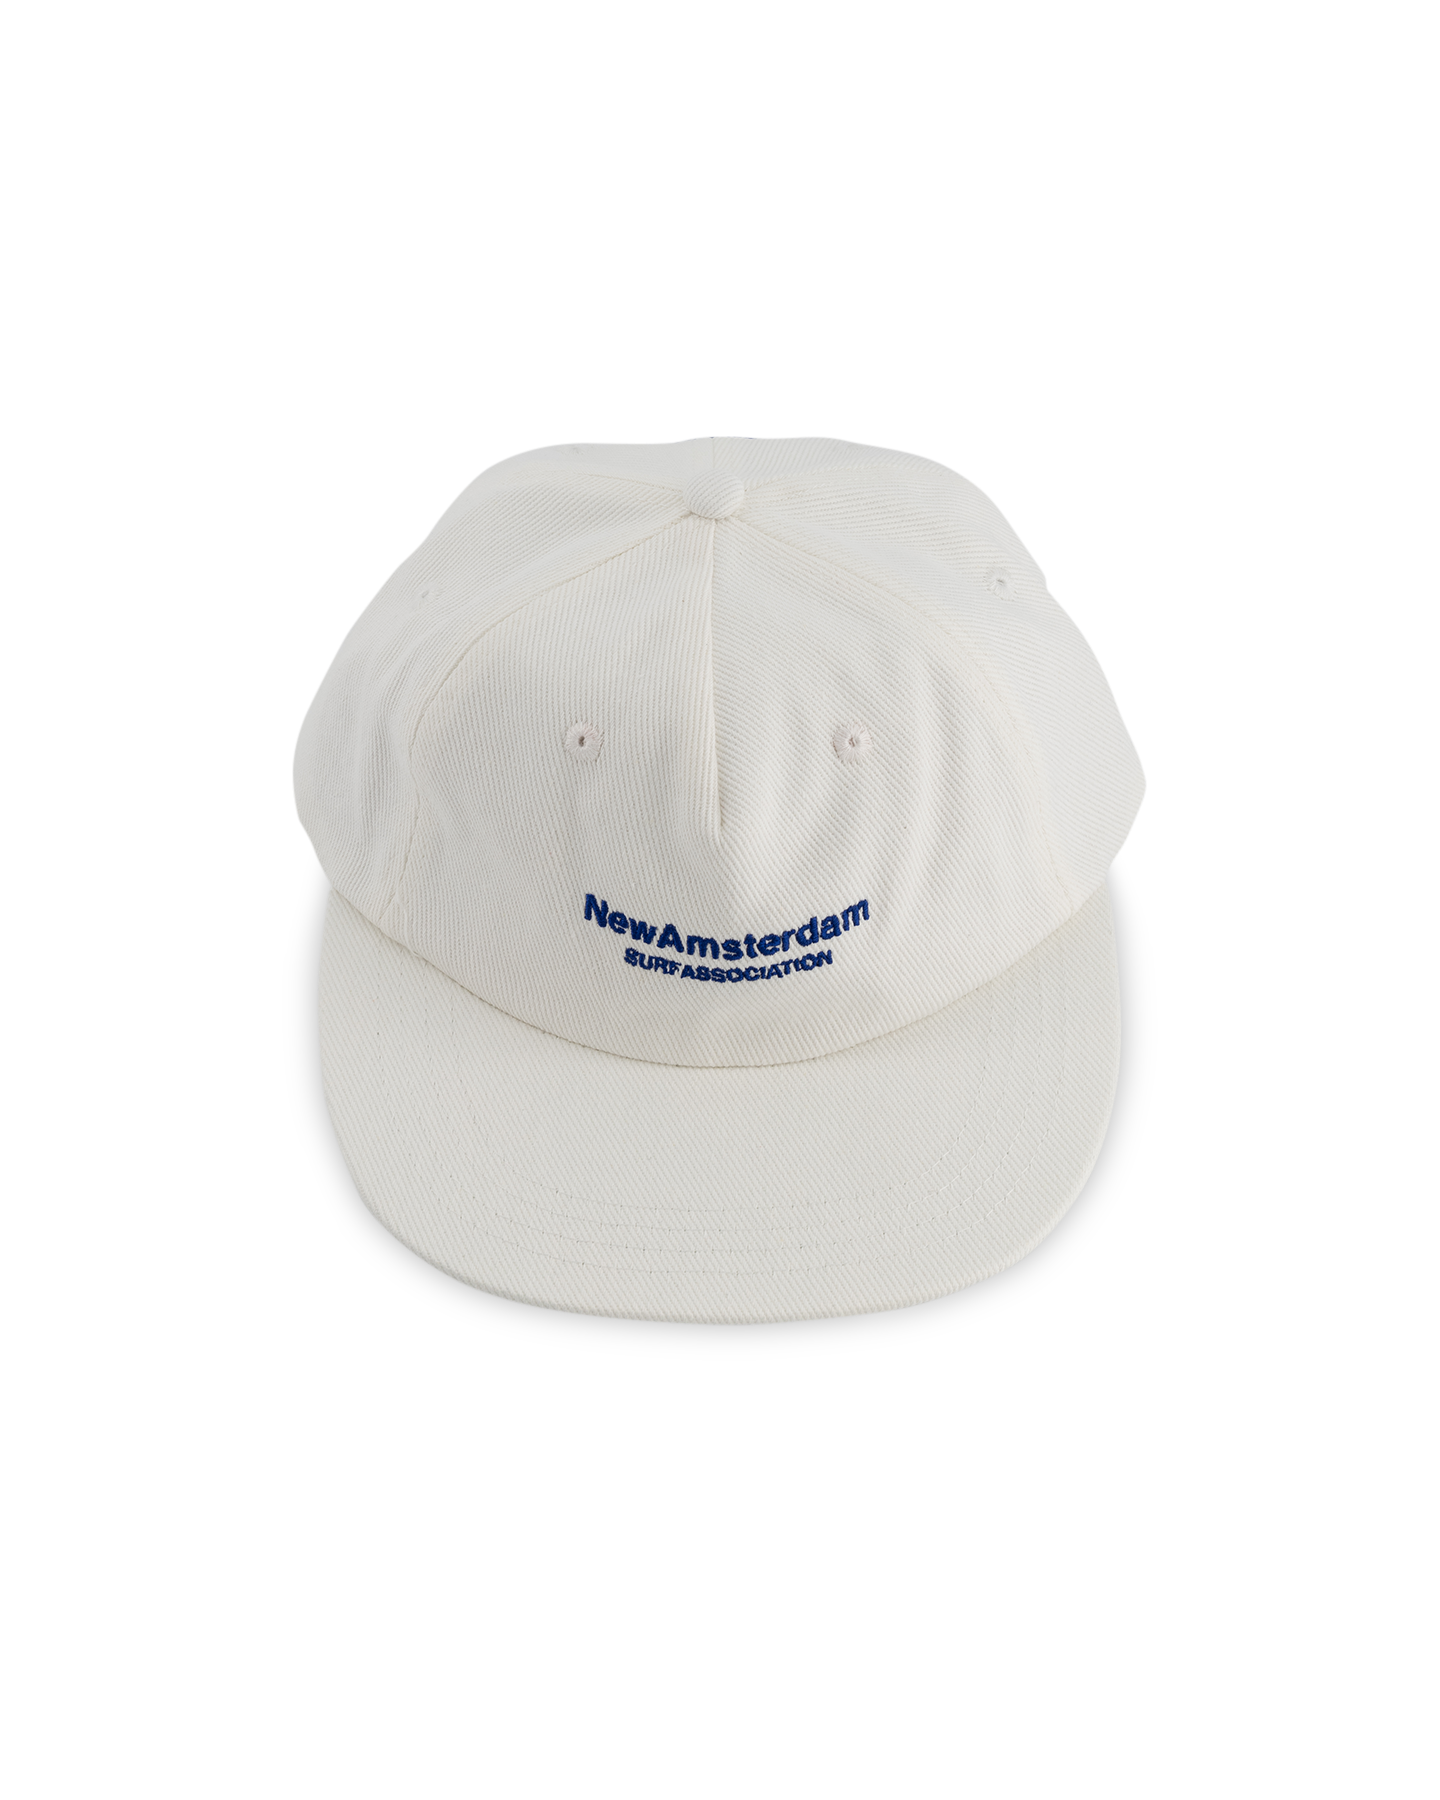 New Amsterdam Surf Association Name Cap White WIT 1